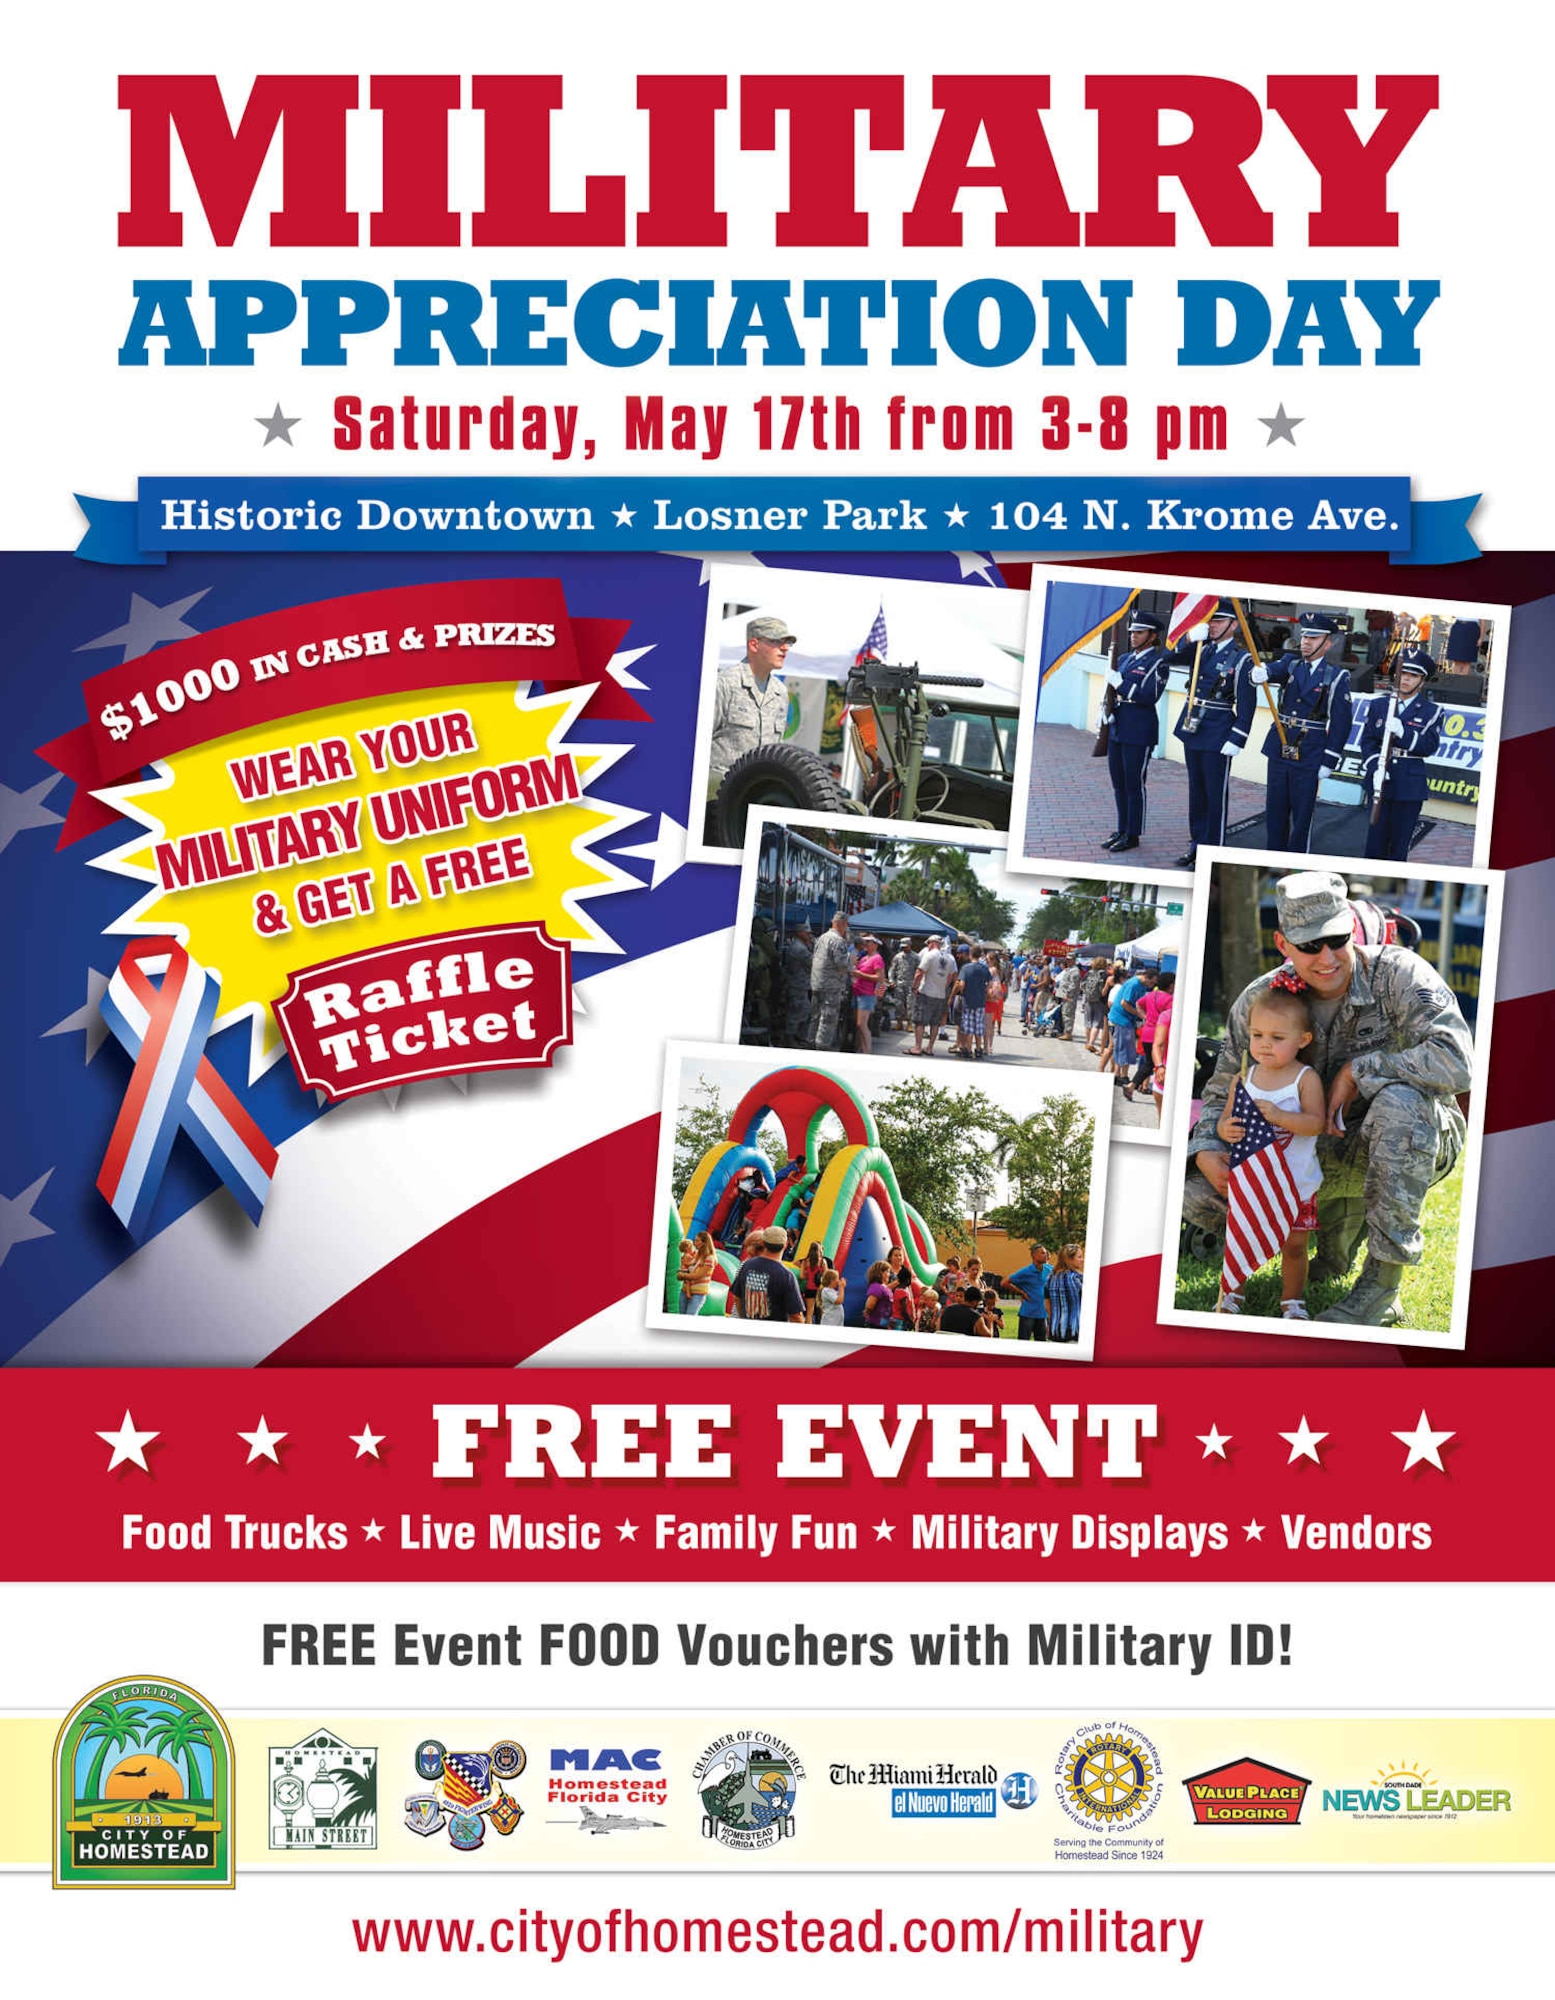 2014 Military Appreciation Day, May 17 from 3 – 8 p.m., downtown Homestead at Losner Park